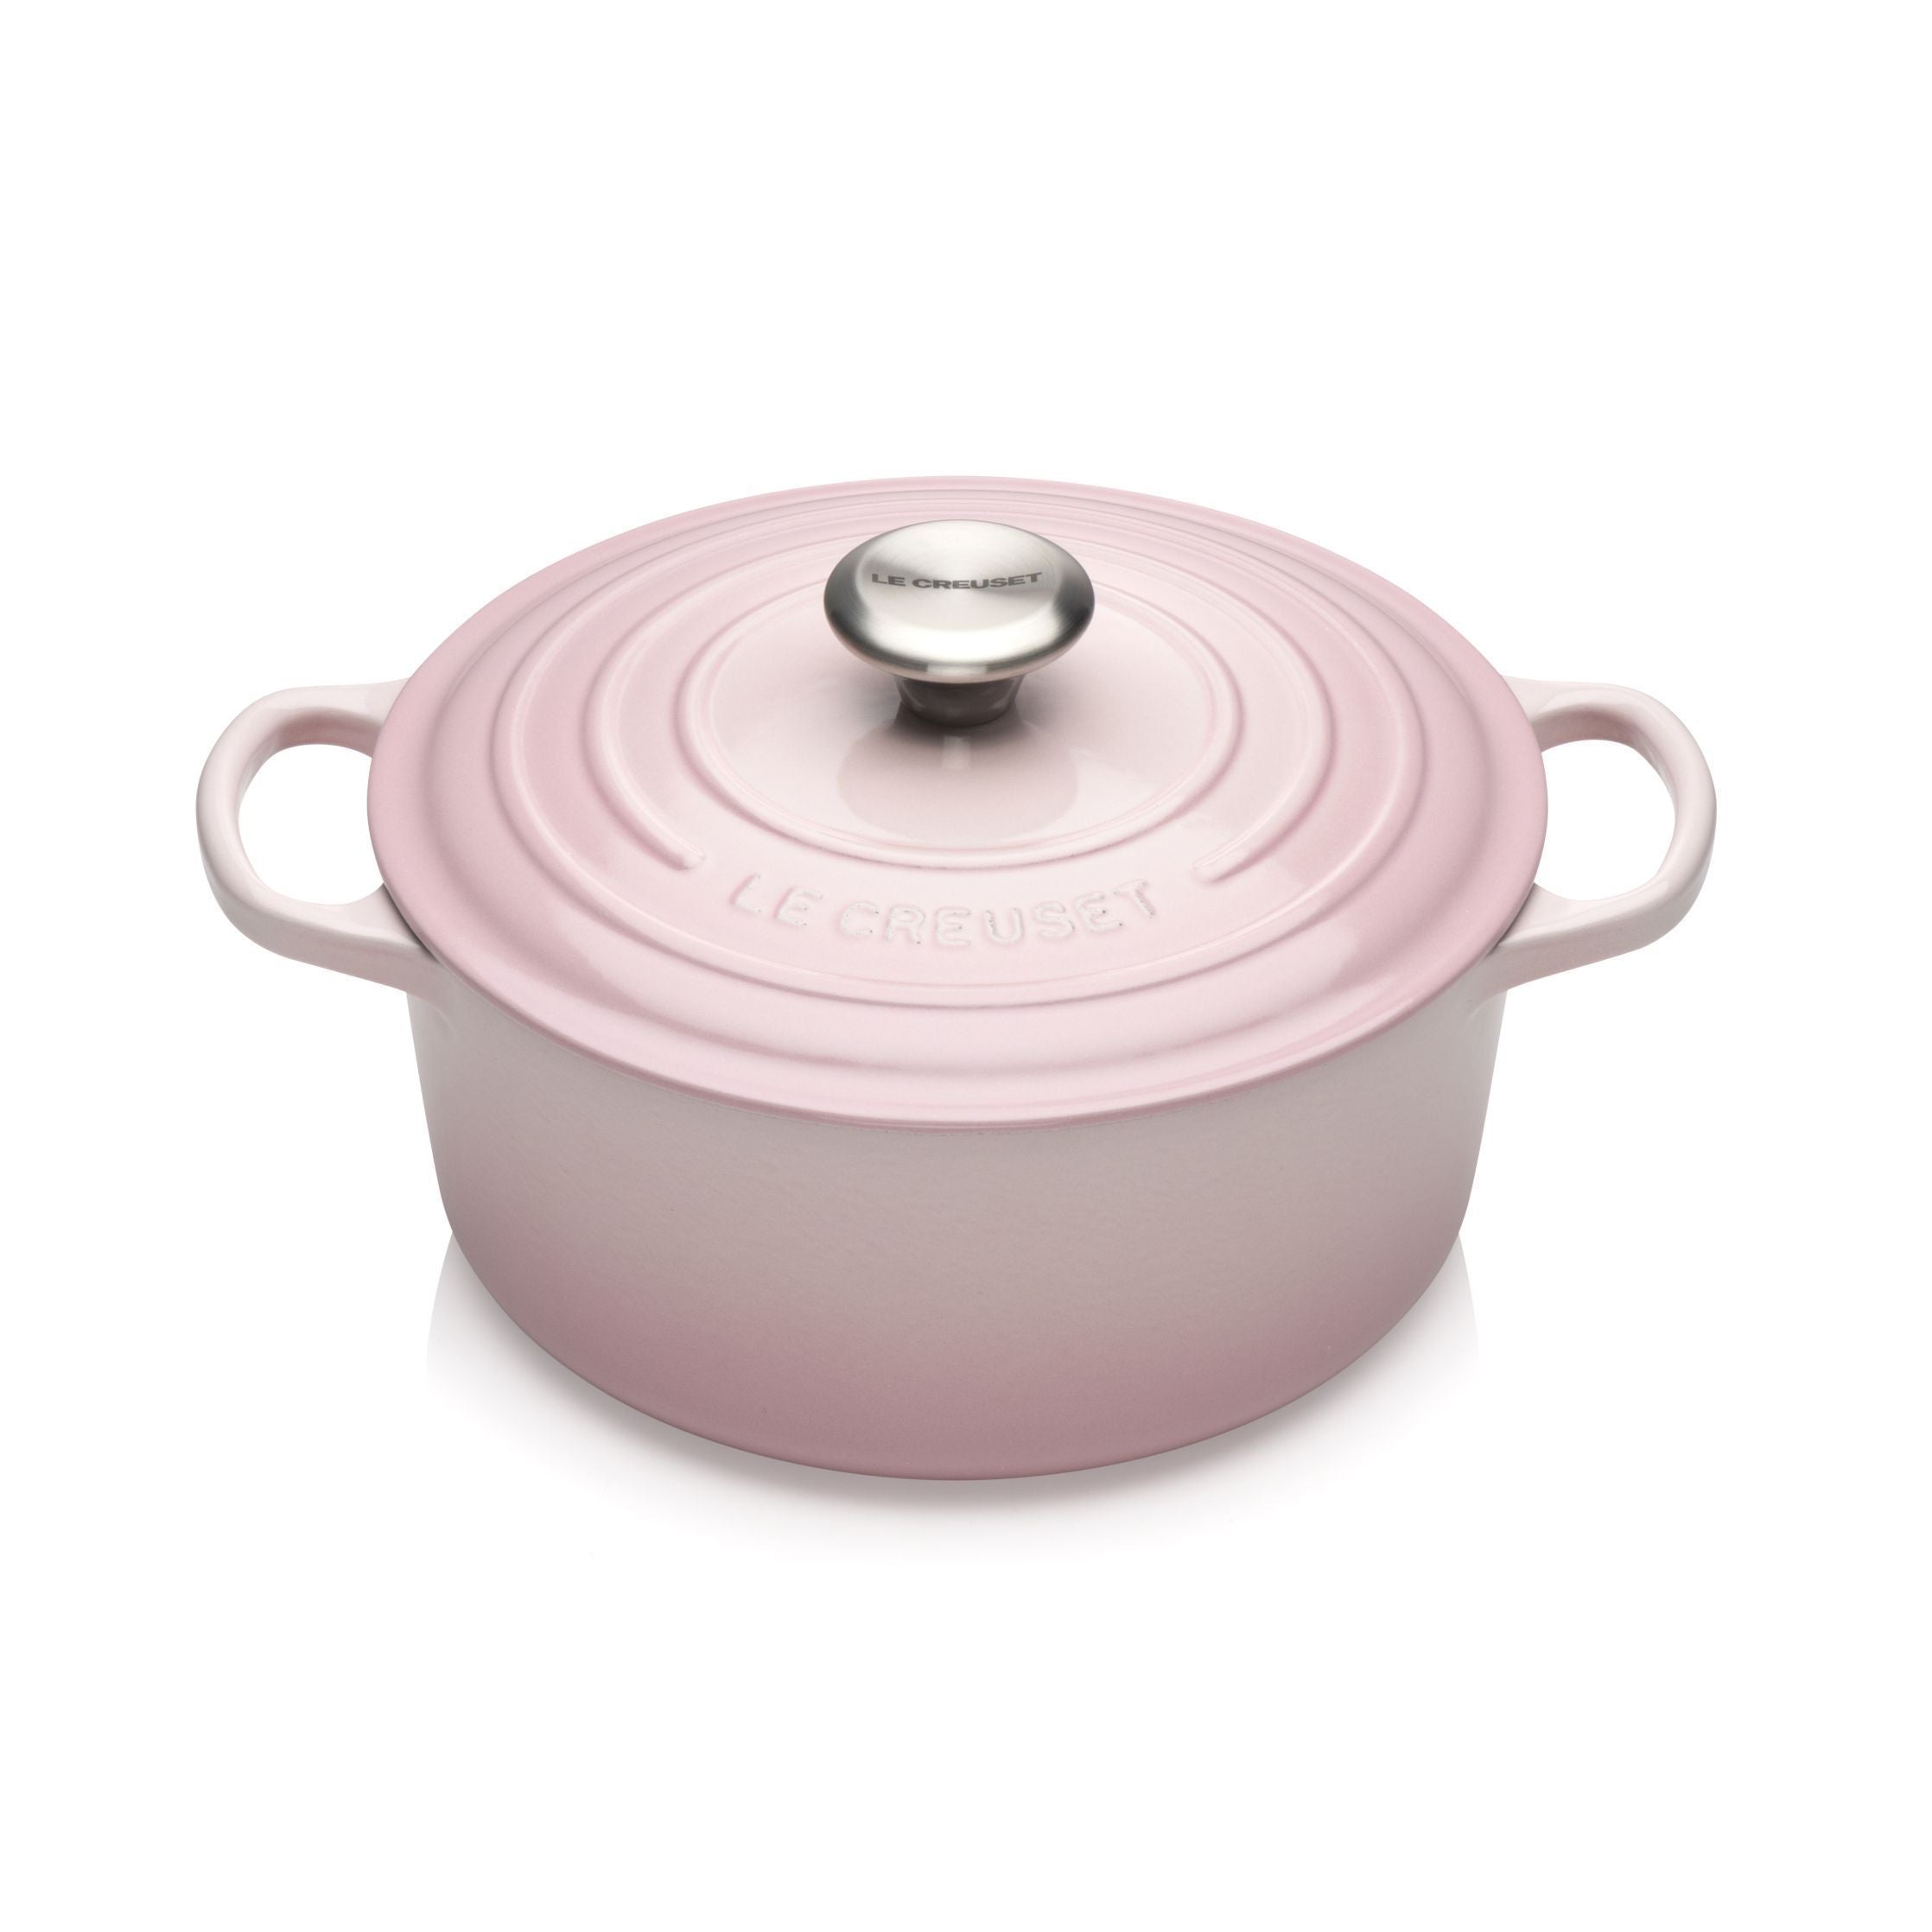 Le Creuset Signature Round Röster 24 cm, Shell Pink